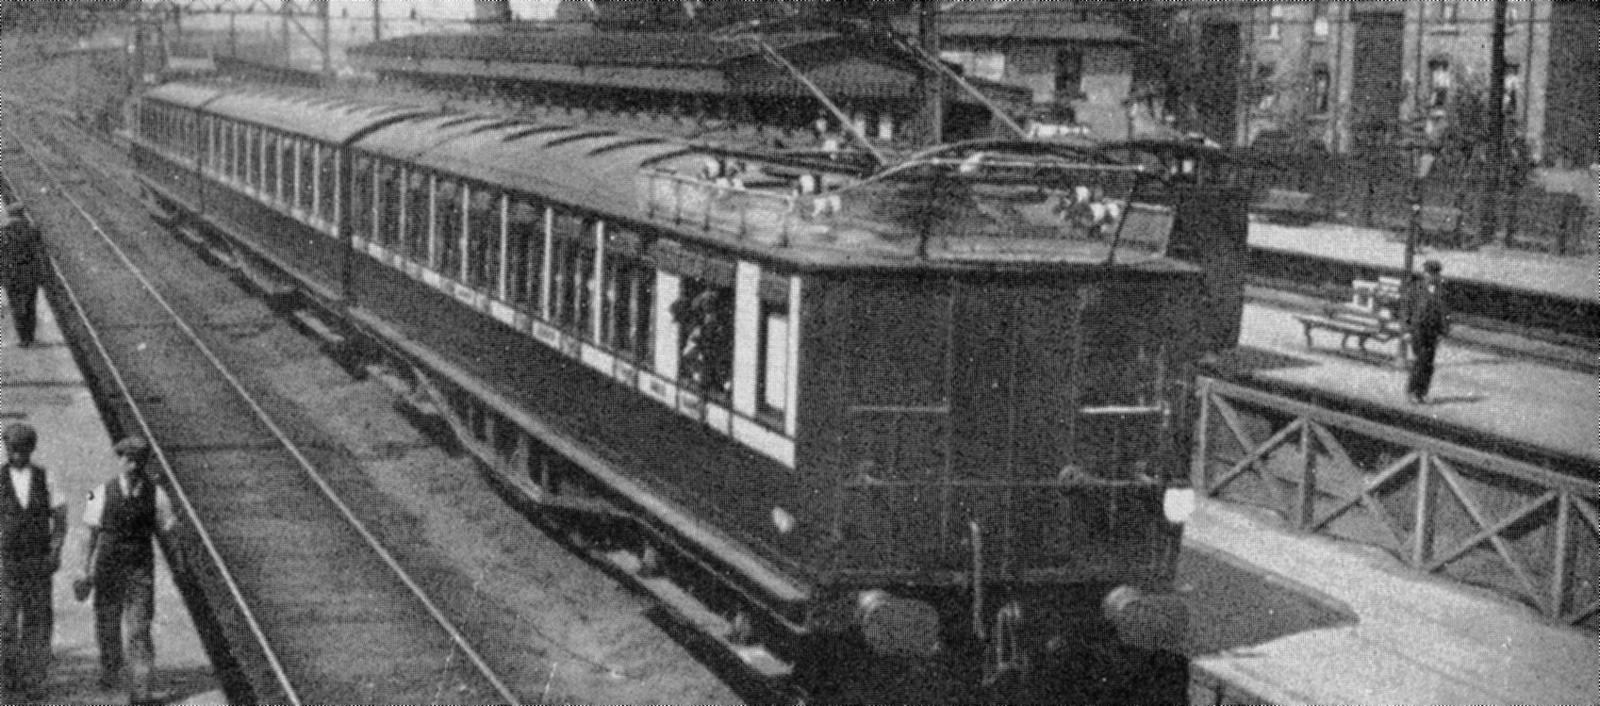 One of the trains in 1909 at Wandsworth Road Station